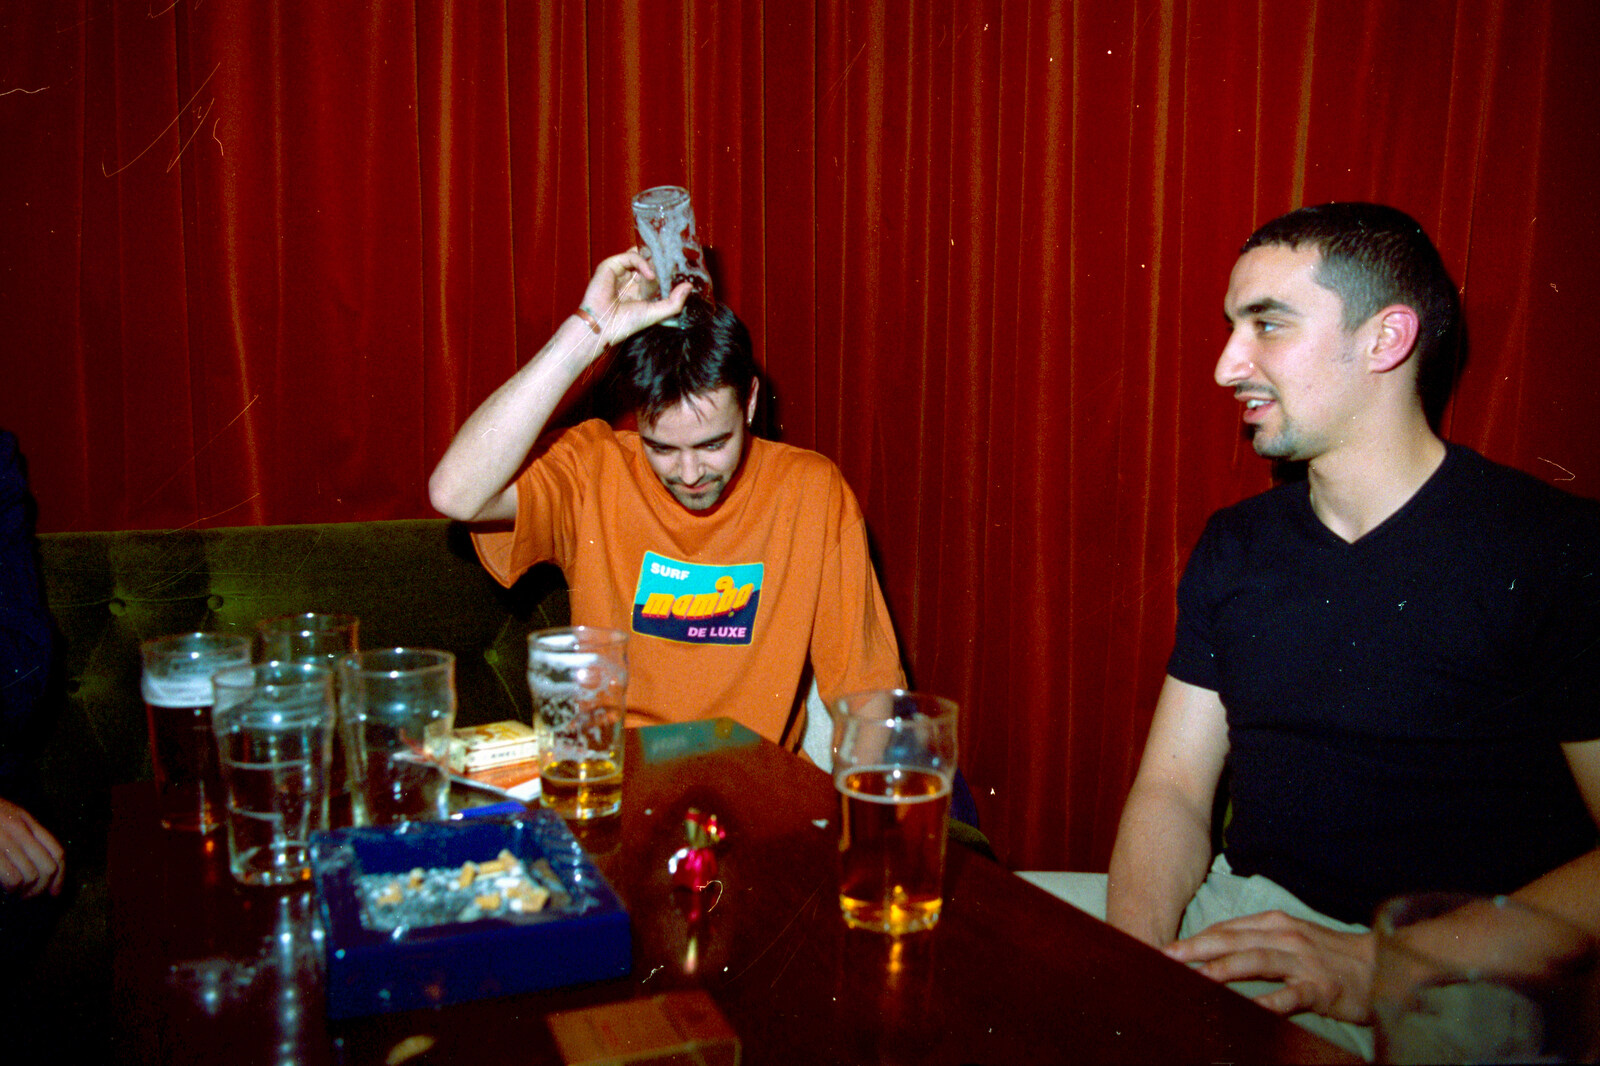 Fred puts his glass on his head from CISU Plays Cardinal's Hat in the SCC Social Club, Ipswich, Suffolk - 3rd August 1997